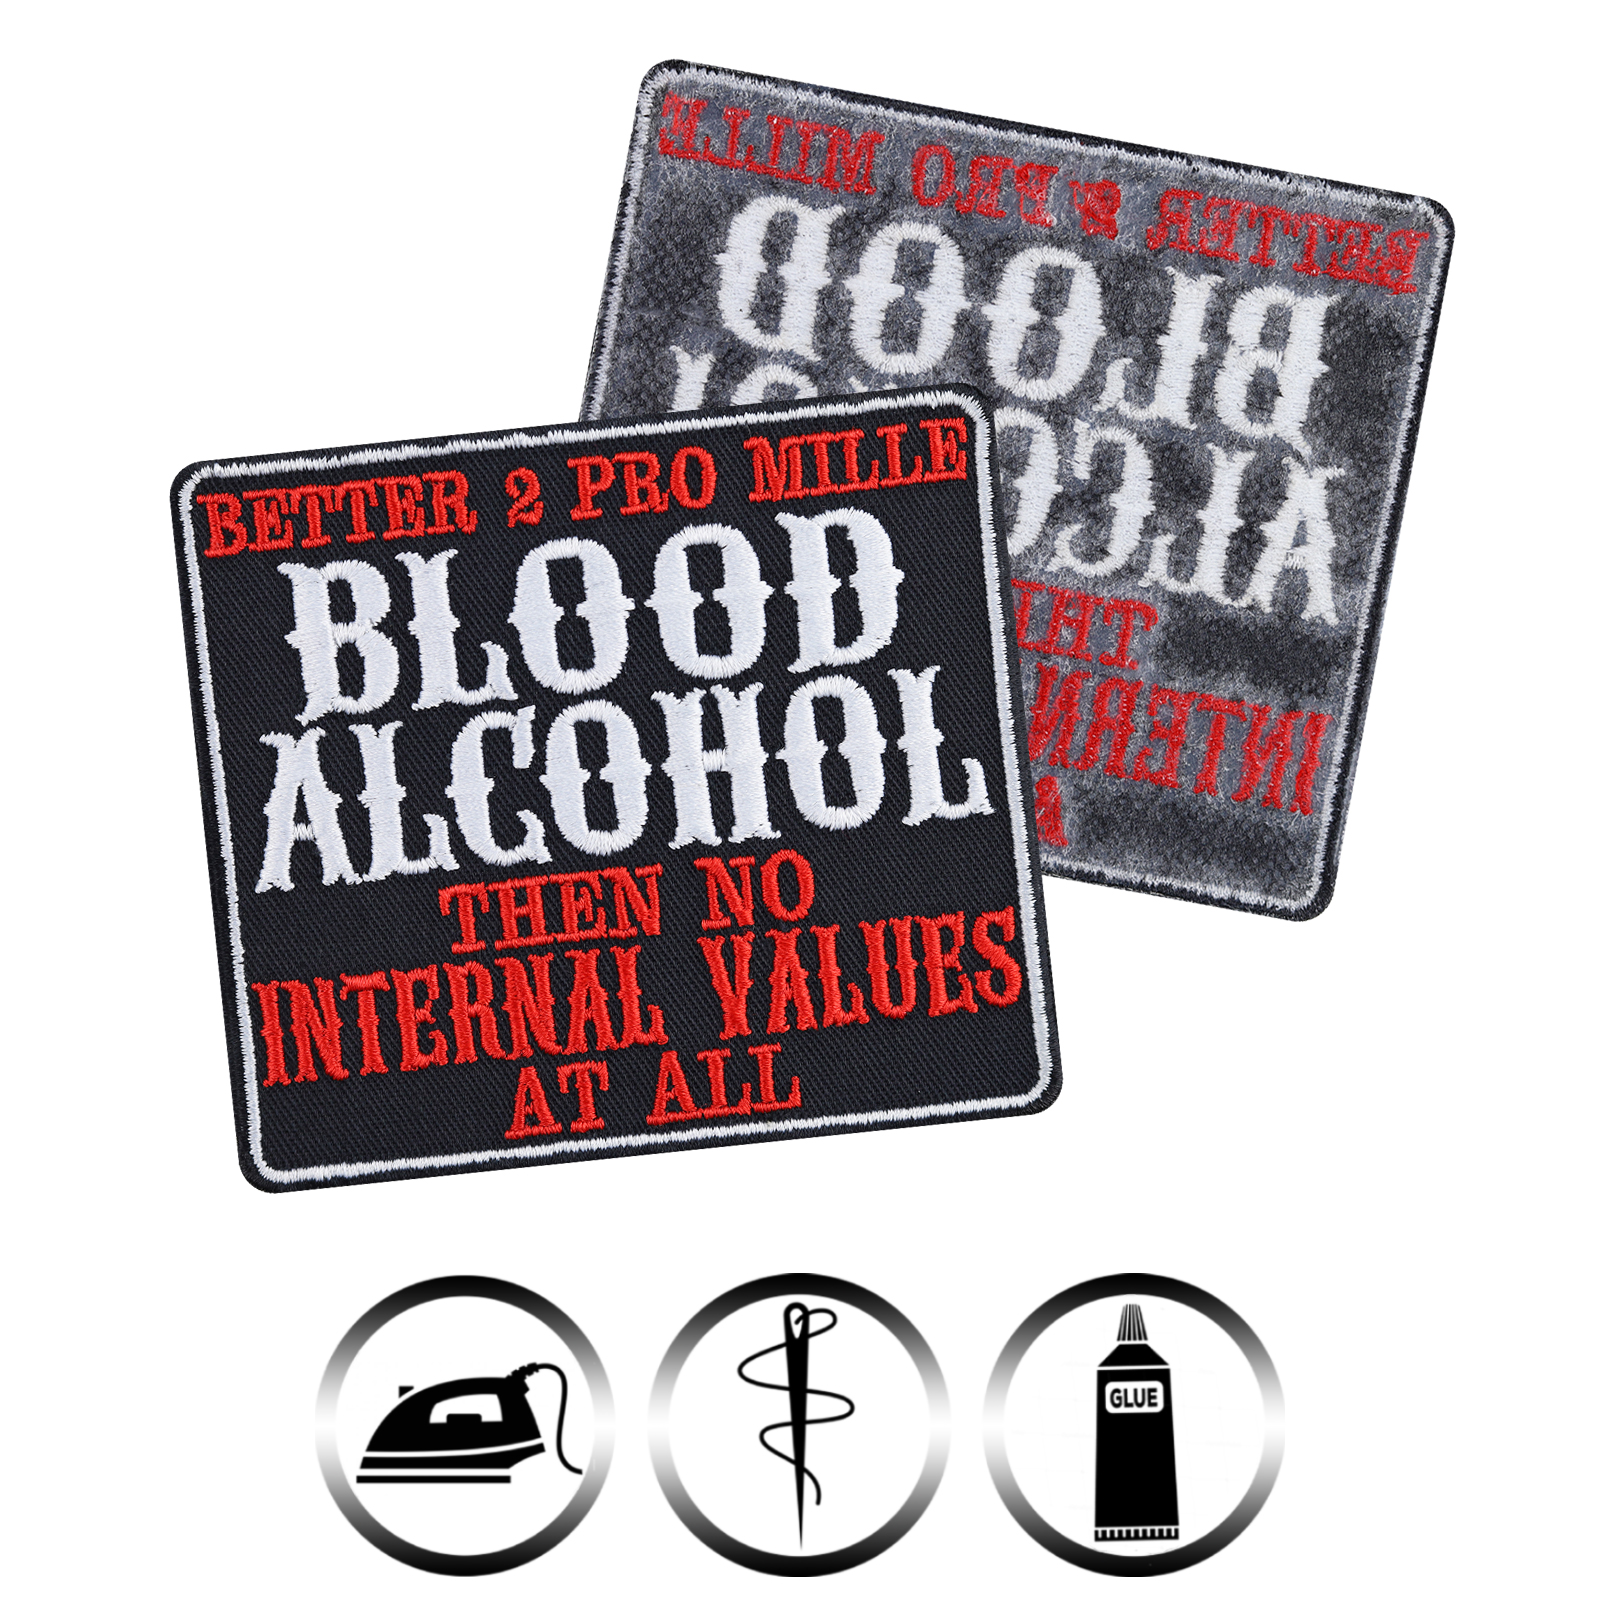 Better 2 pro mille blood alcohol than no internal values at all - Patch